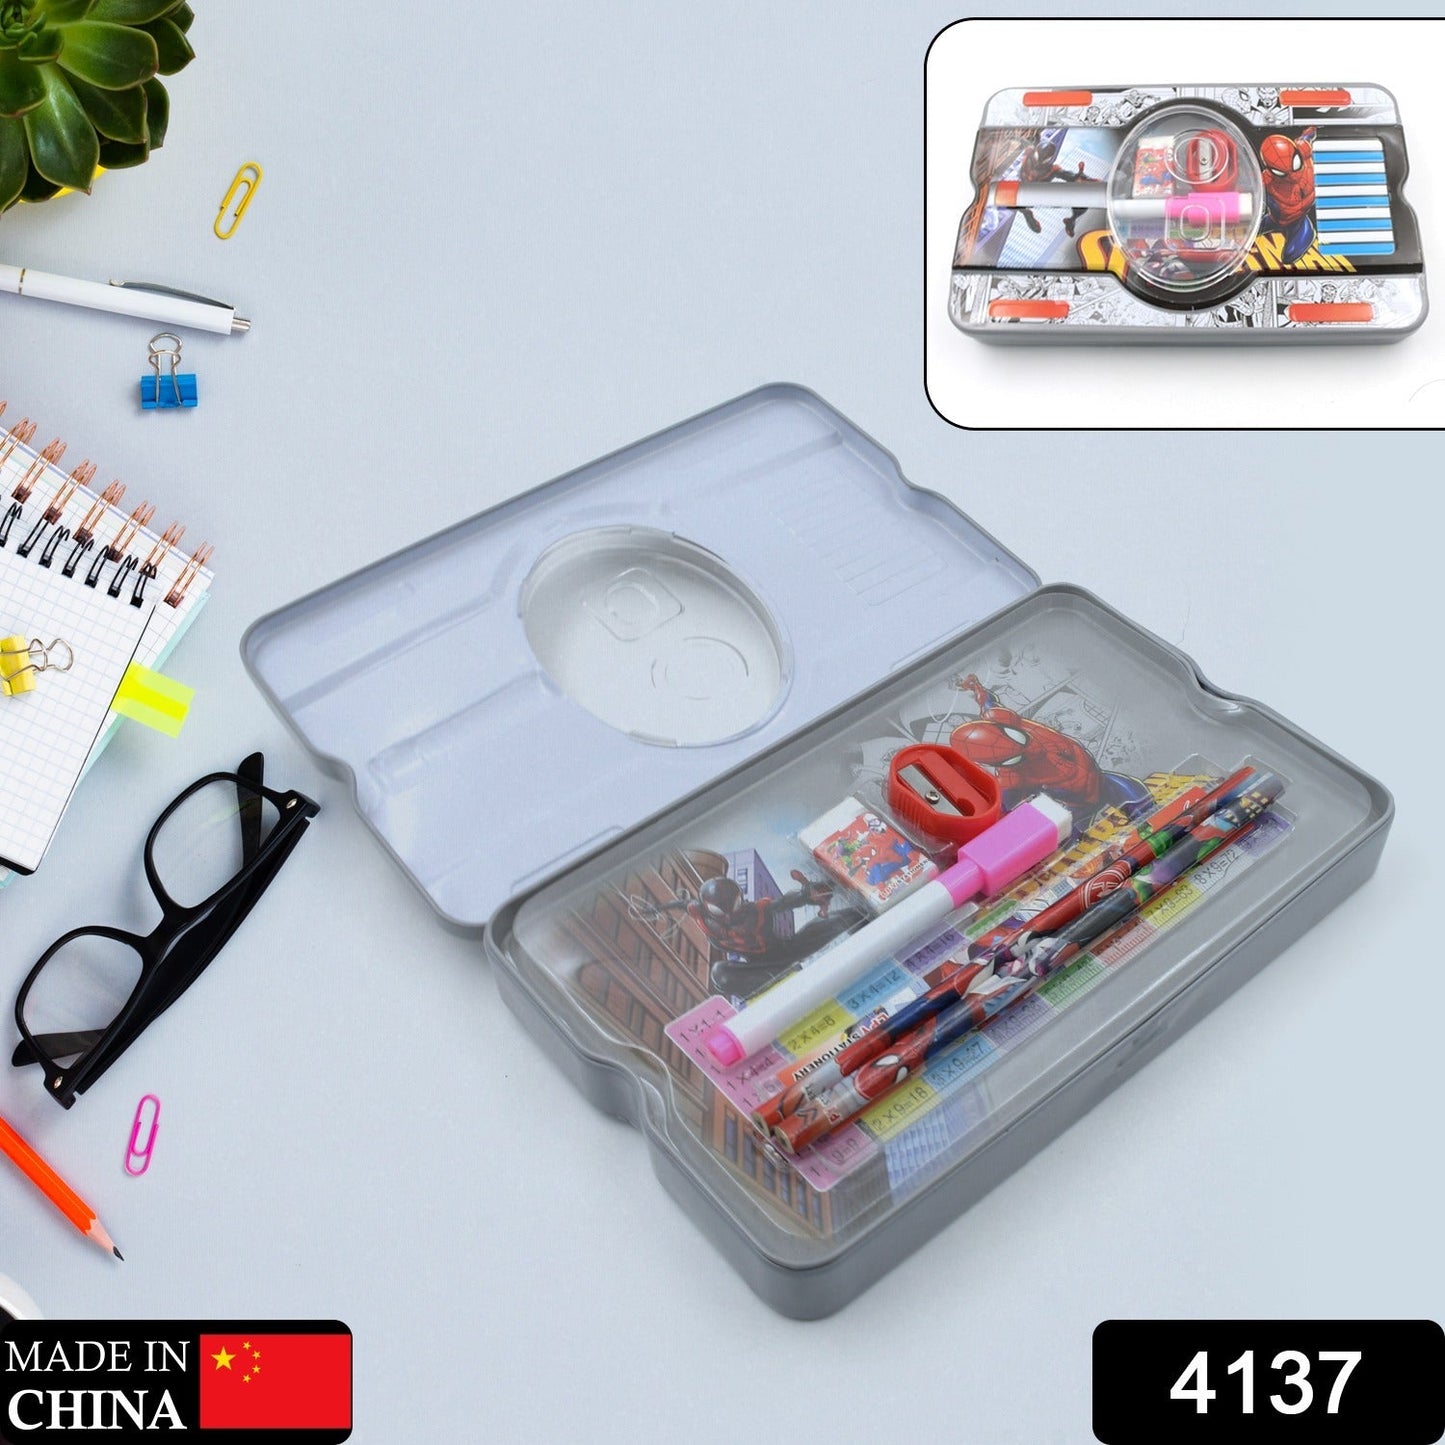 4137 Big Cartoon Printed  Metal Compass Box, Pencil Case With Sharpner, Eraser, Pencil, Marker & Scale for Kids Stationery Compass Box, Stationery Gift for School Kids Compass, Pencil Box, Birthday Return Gift for Kids  (6 Pc Set)